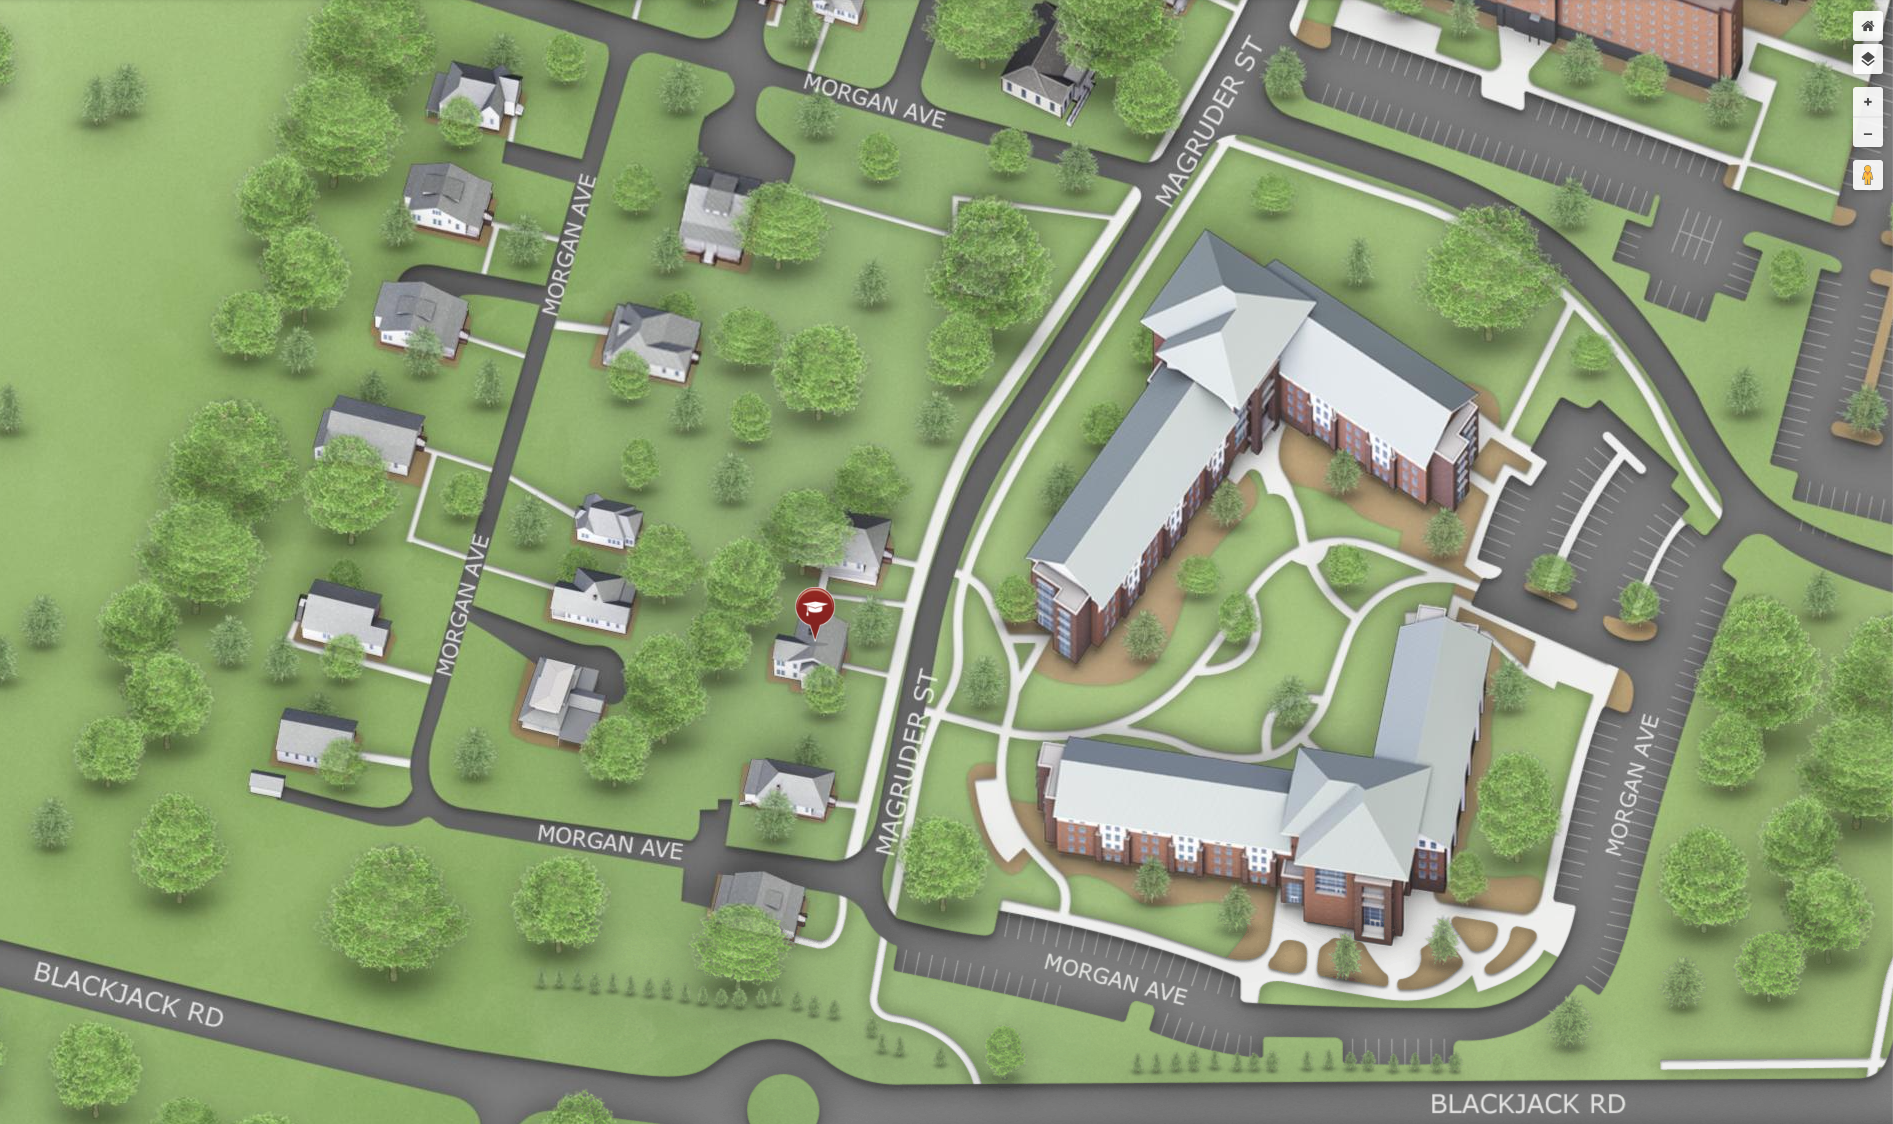 Map of MSU showing the Environmental Health and Safety building